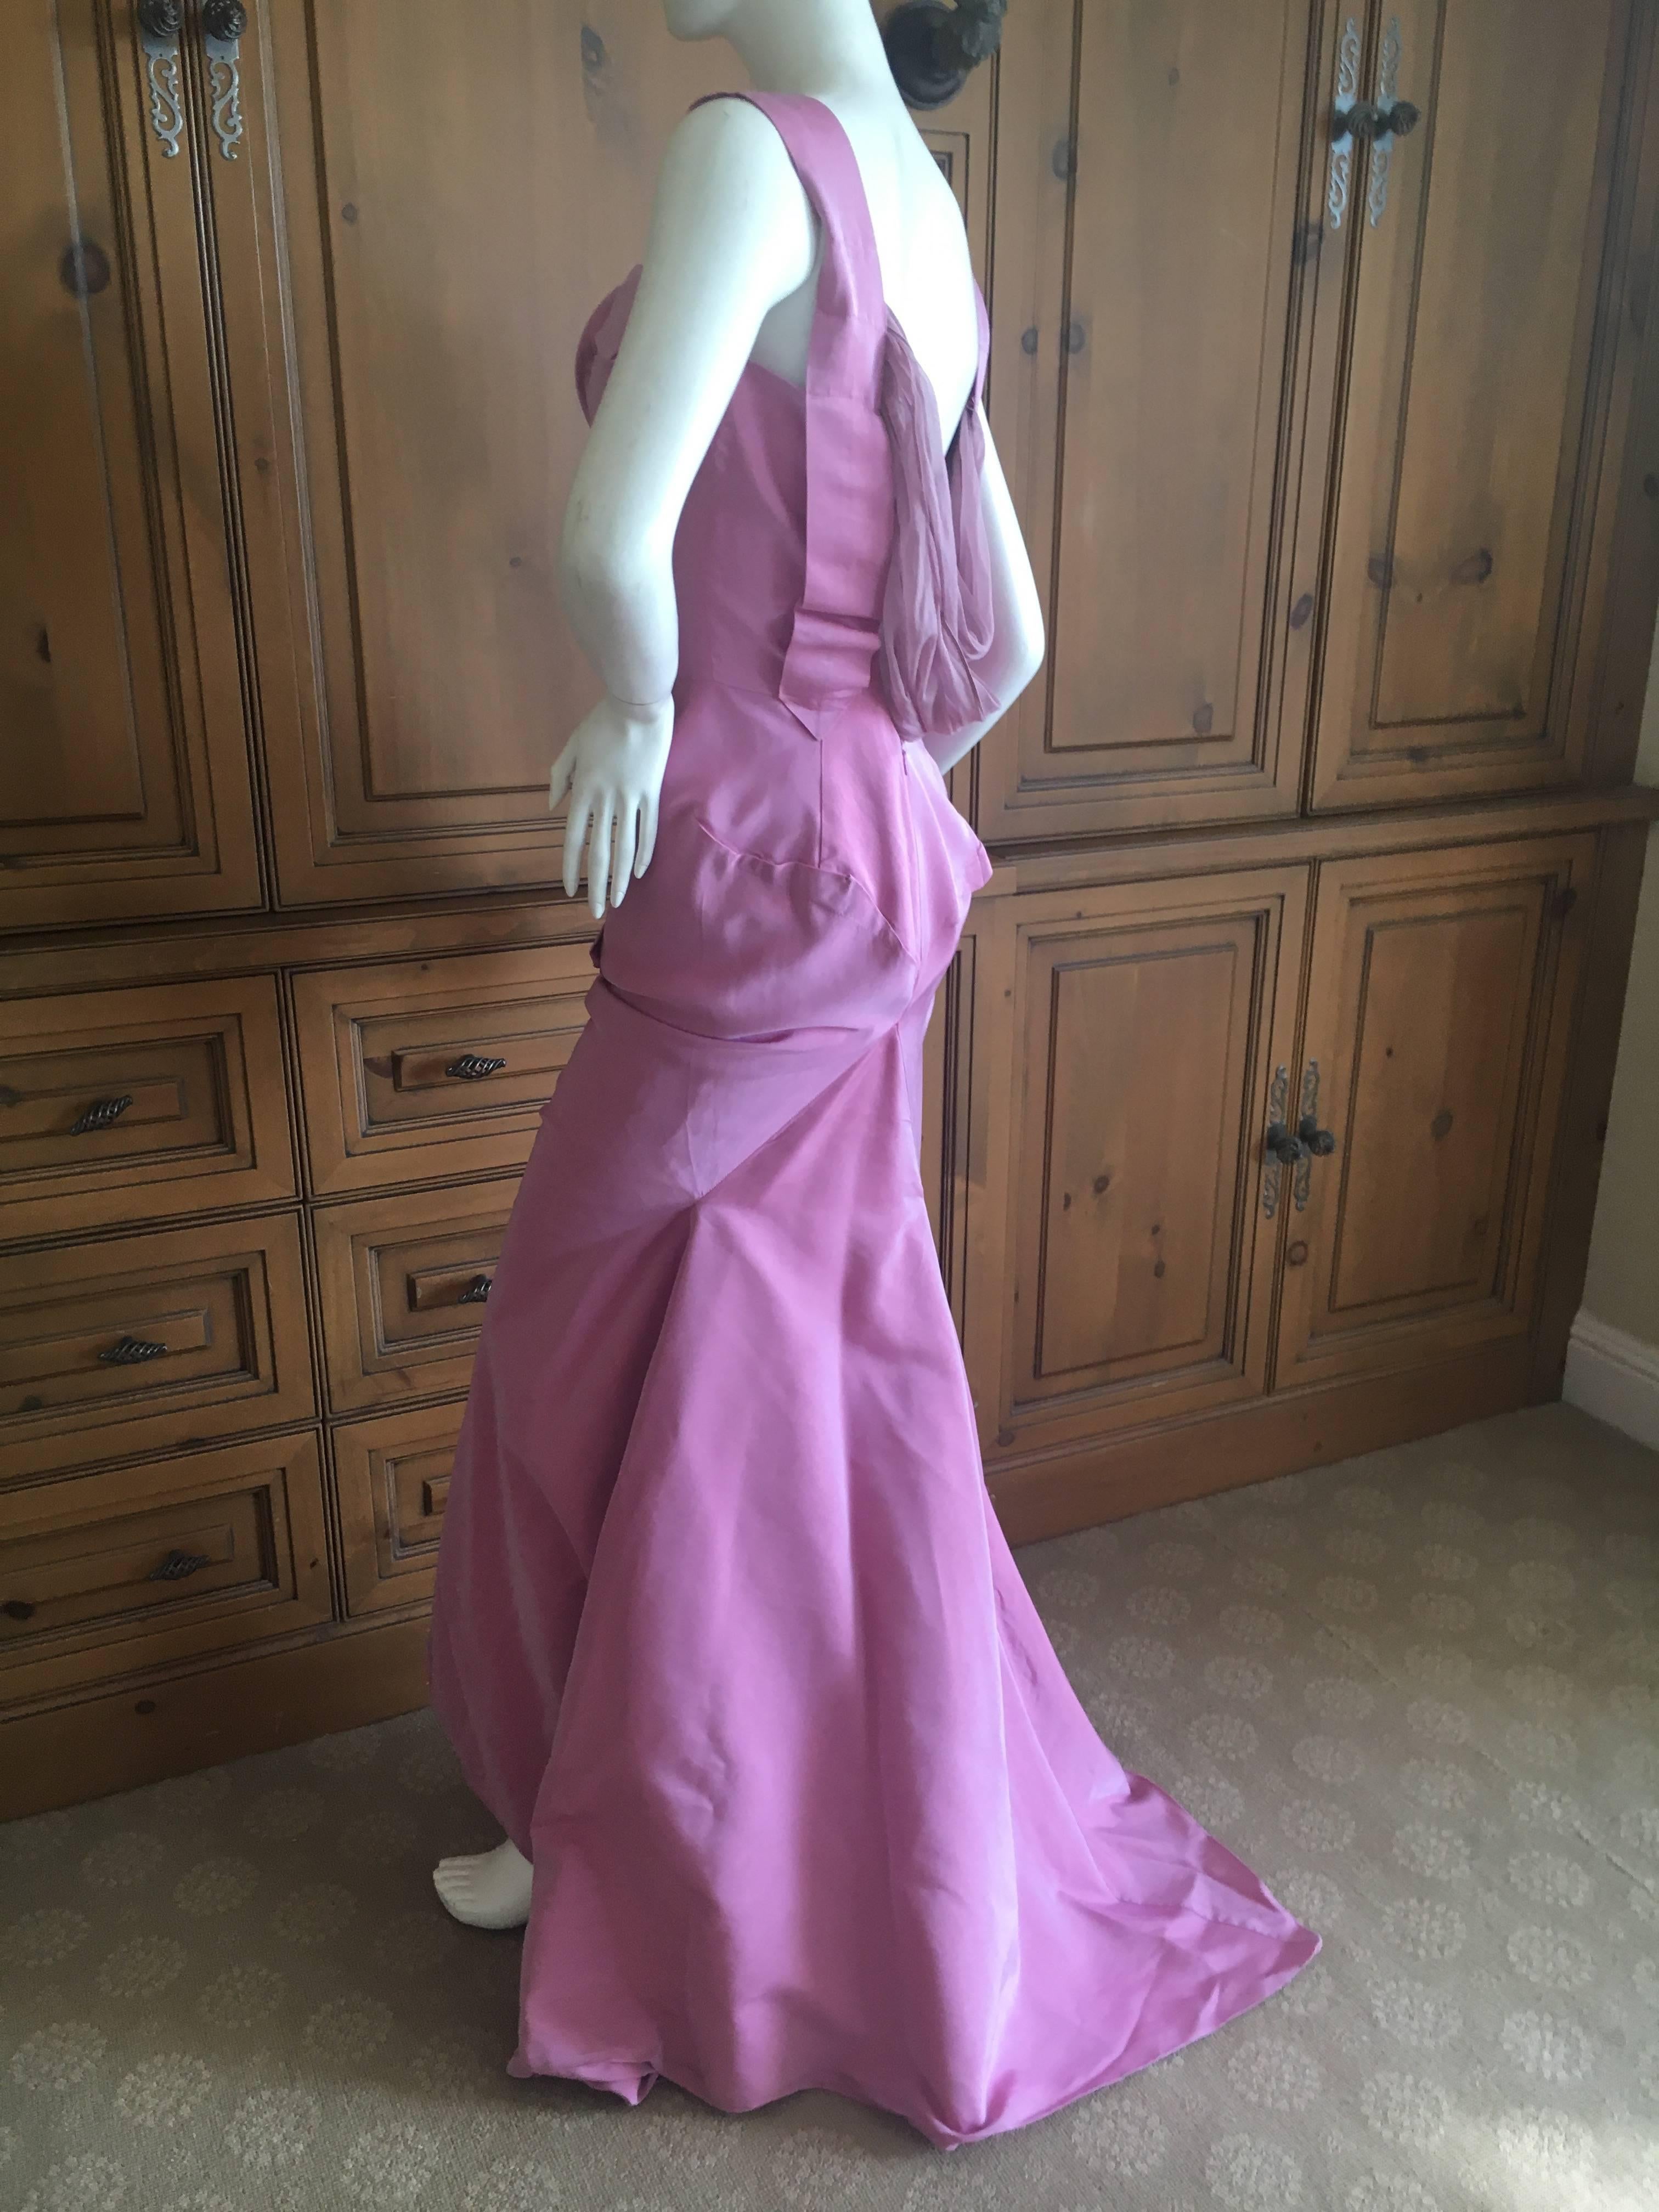 Vivienne Westwood Gold Label Rose Pink Evening Dress with Fishtail Train, 2011  In Excellent Condition For Sale In Cloverdale, CA